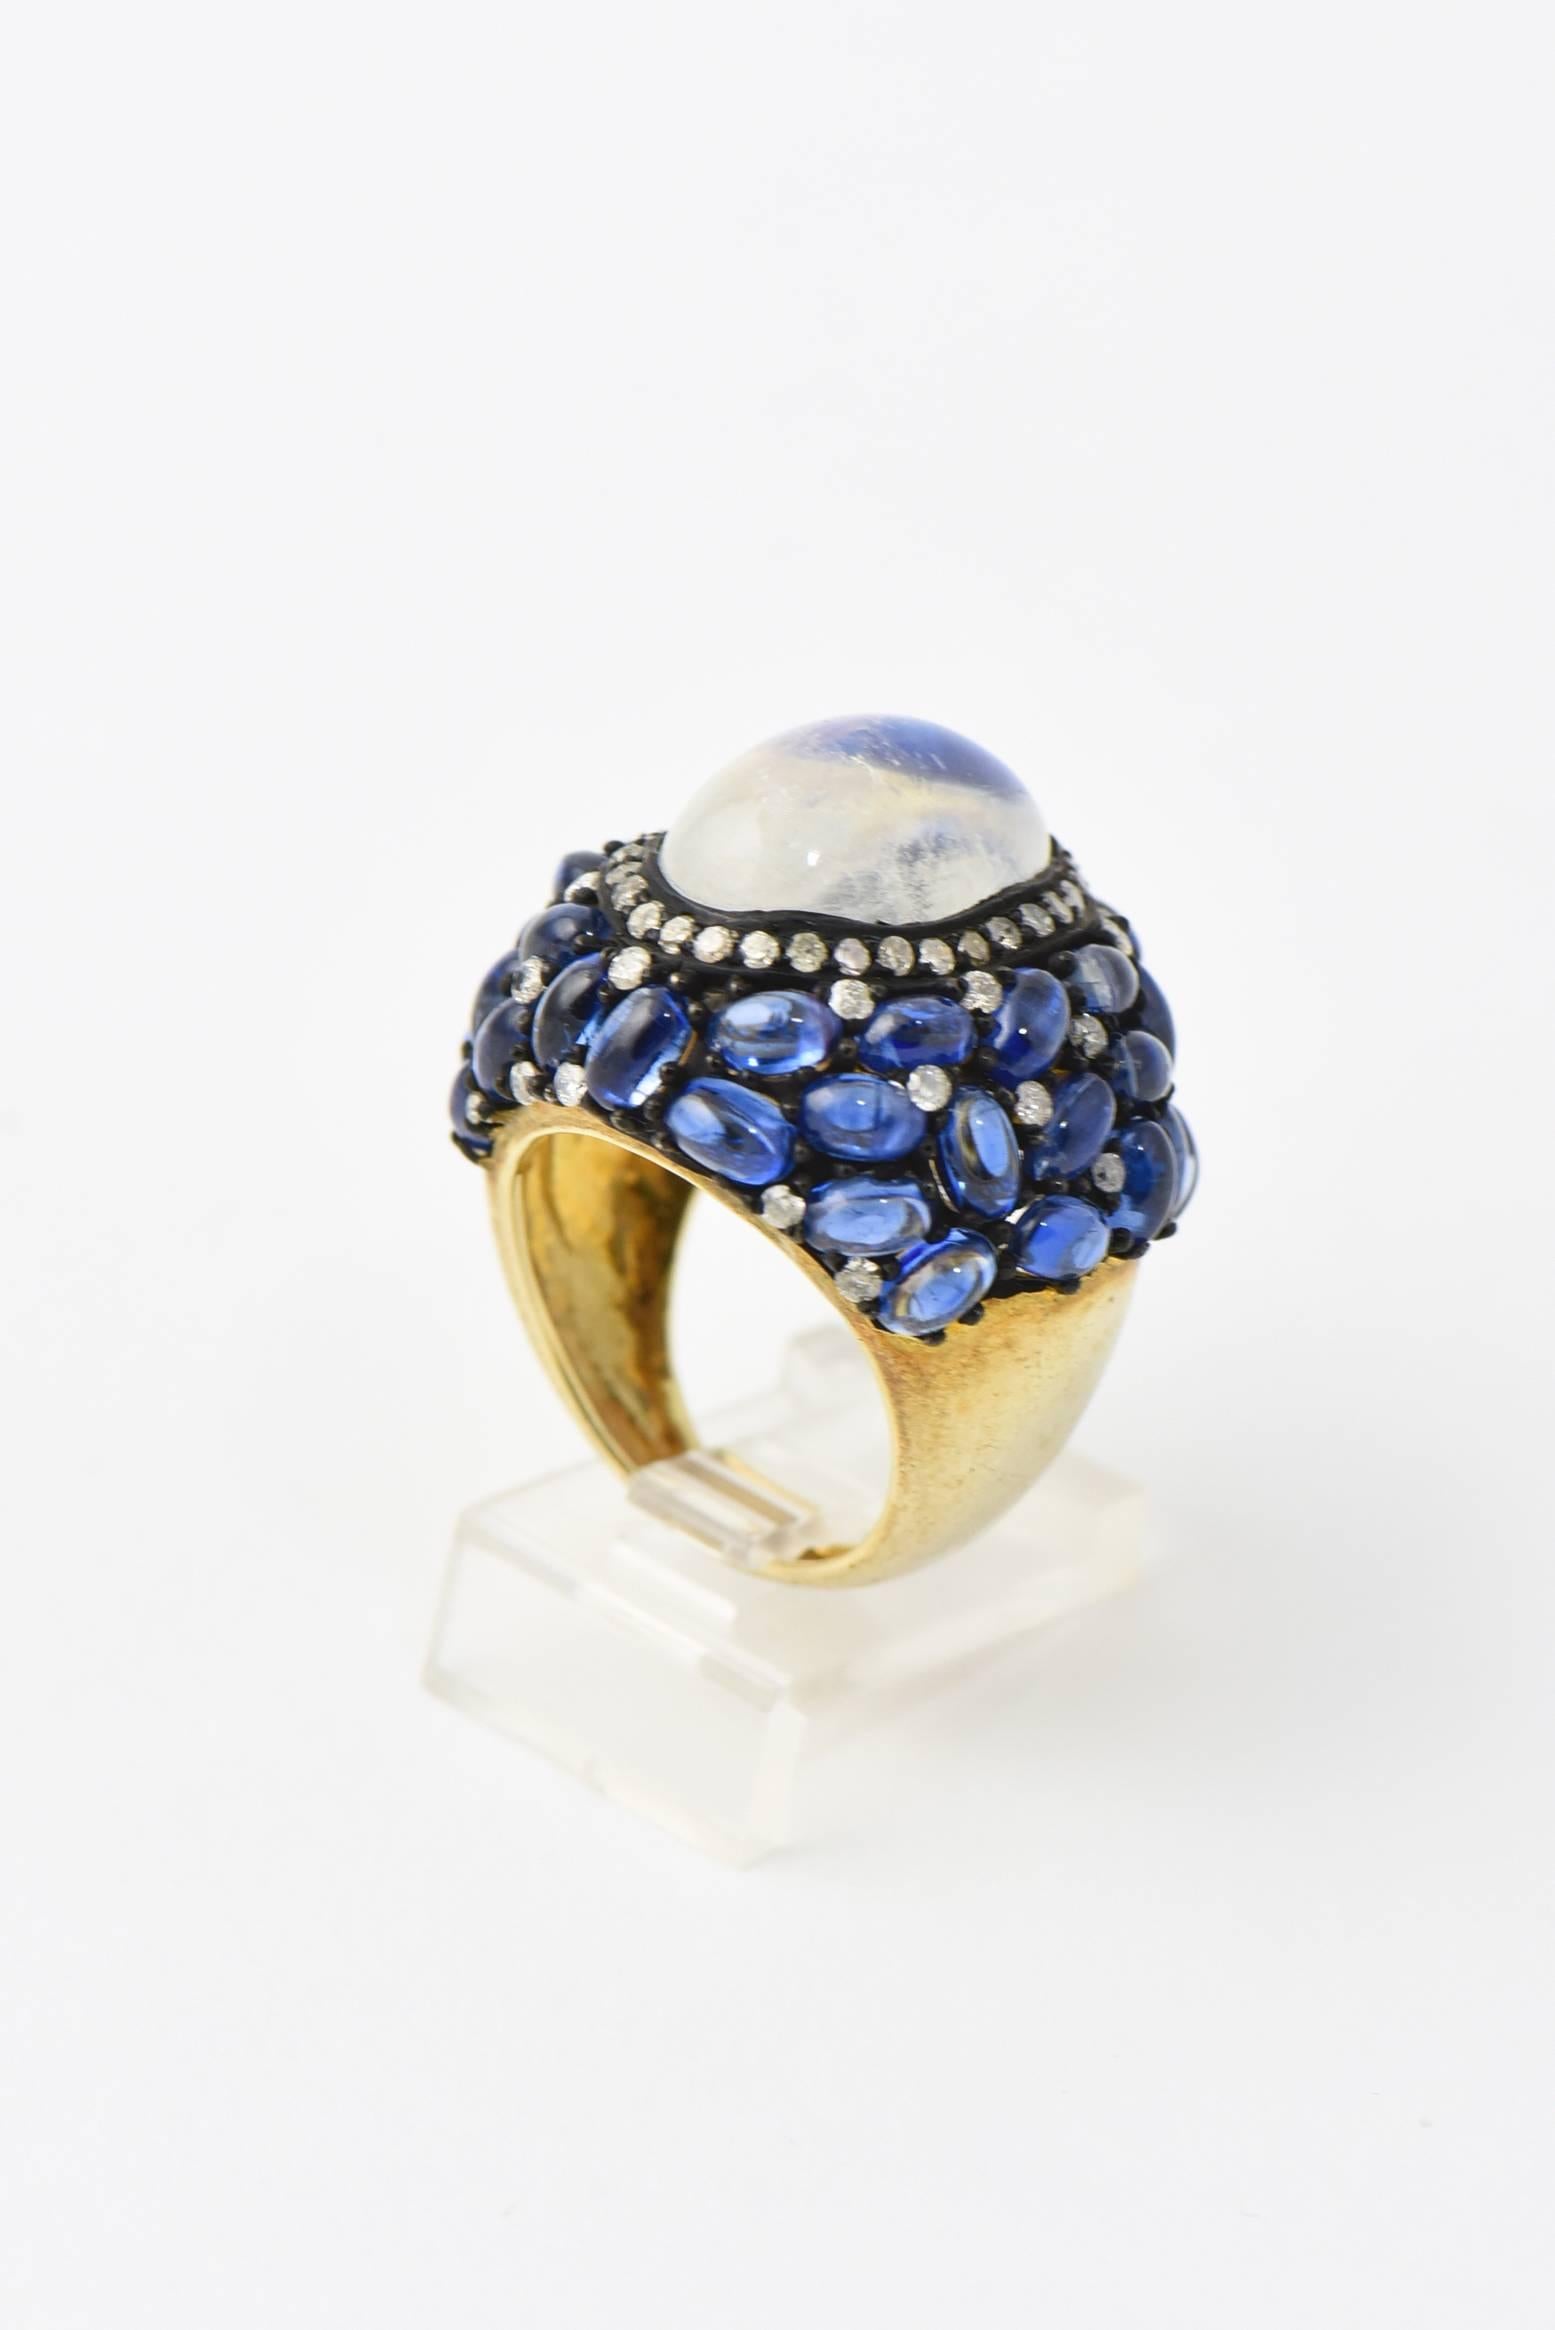 Dome shaped Moonstone, Kyanite and Diamond statement cocktail ring mounted in Vermeil Sterling Silver with an 18k inner band
US size 7
